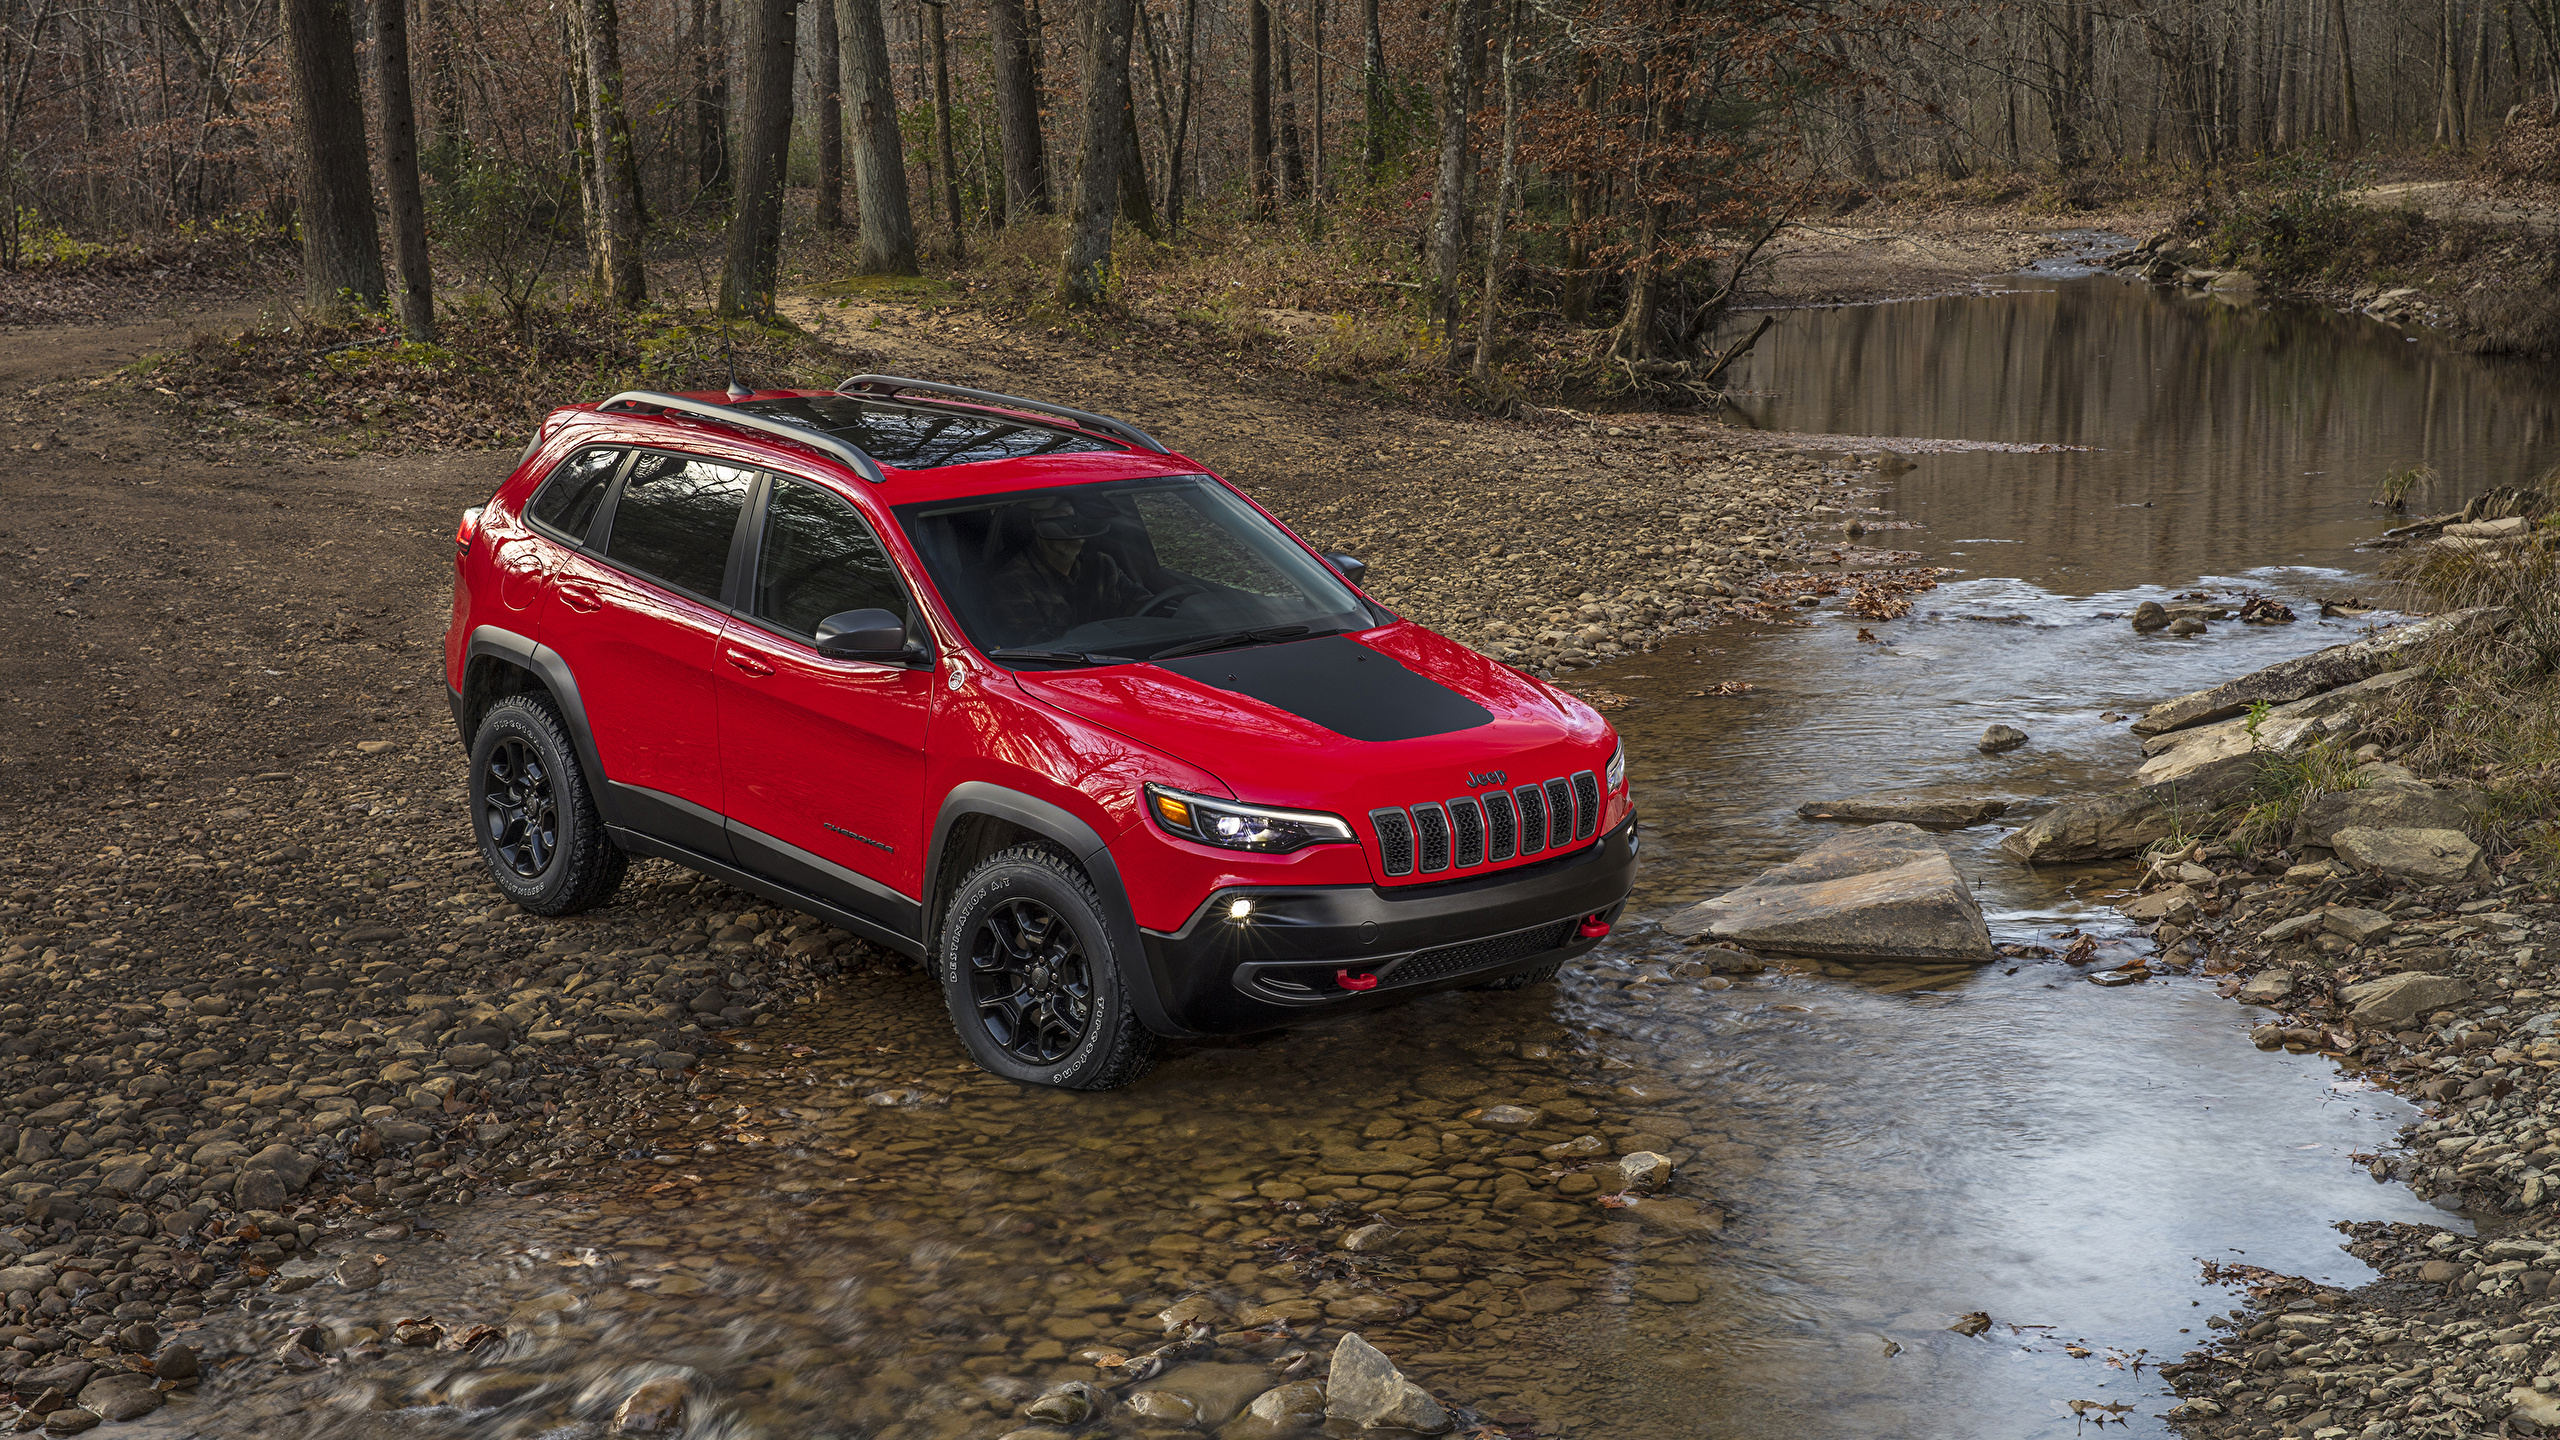 Picture Jeep 2019 Cherokee Trailhawk Red Metallic 2560x1440